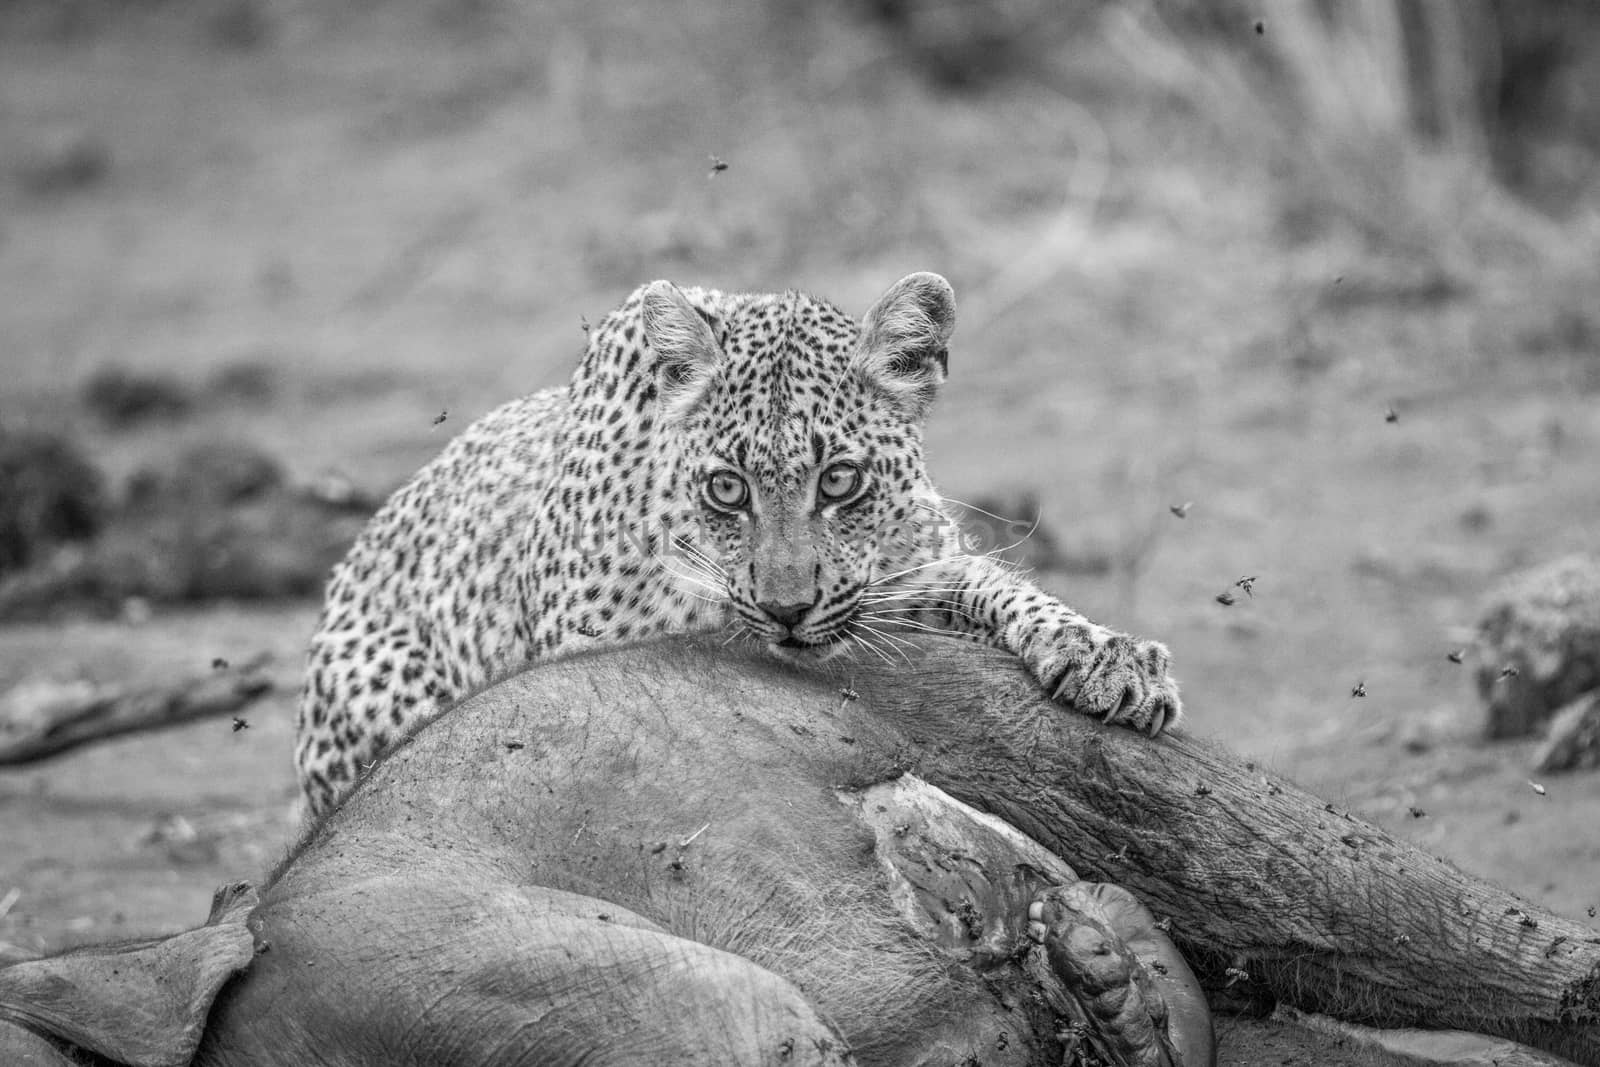 Leopard feeding from an Elephant in black and white in the Kruger National Park. by Simoneemanphotography